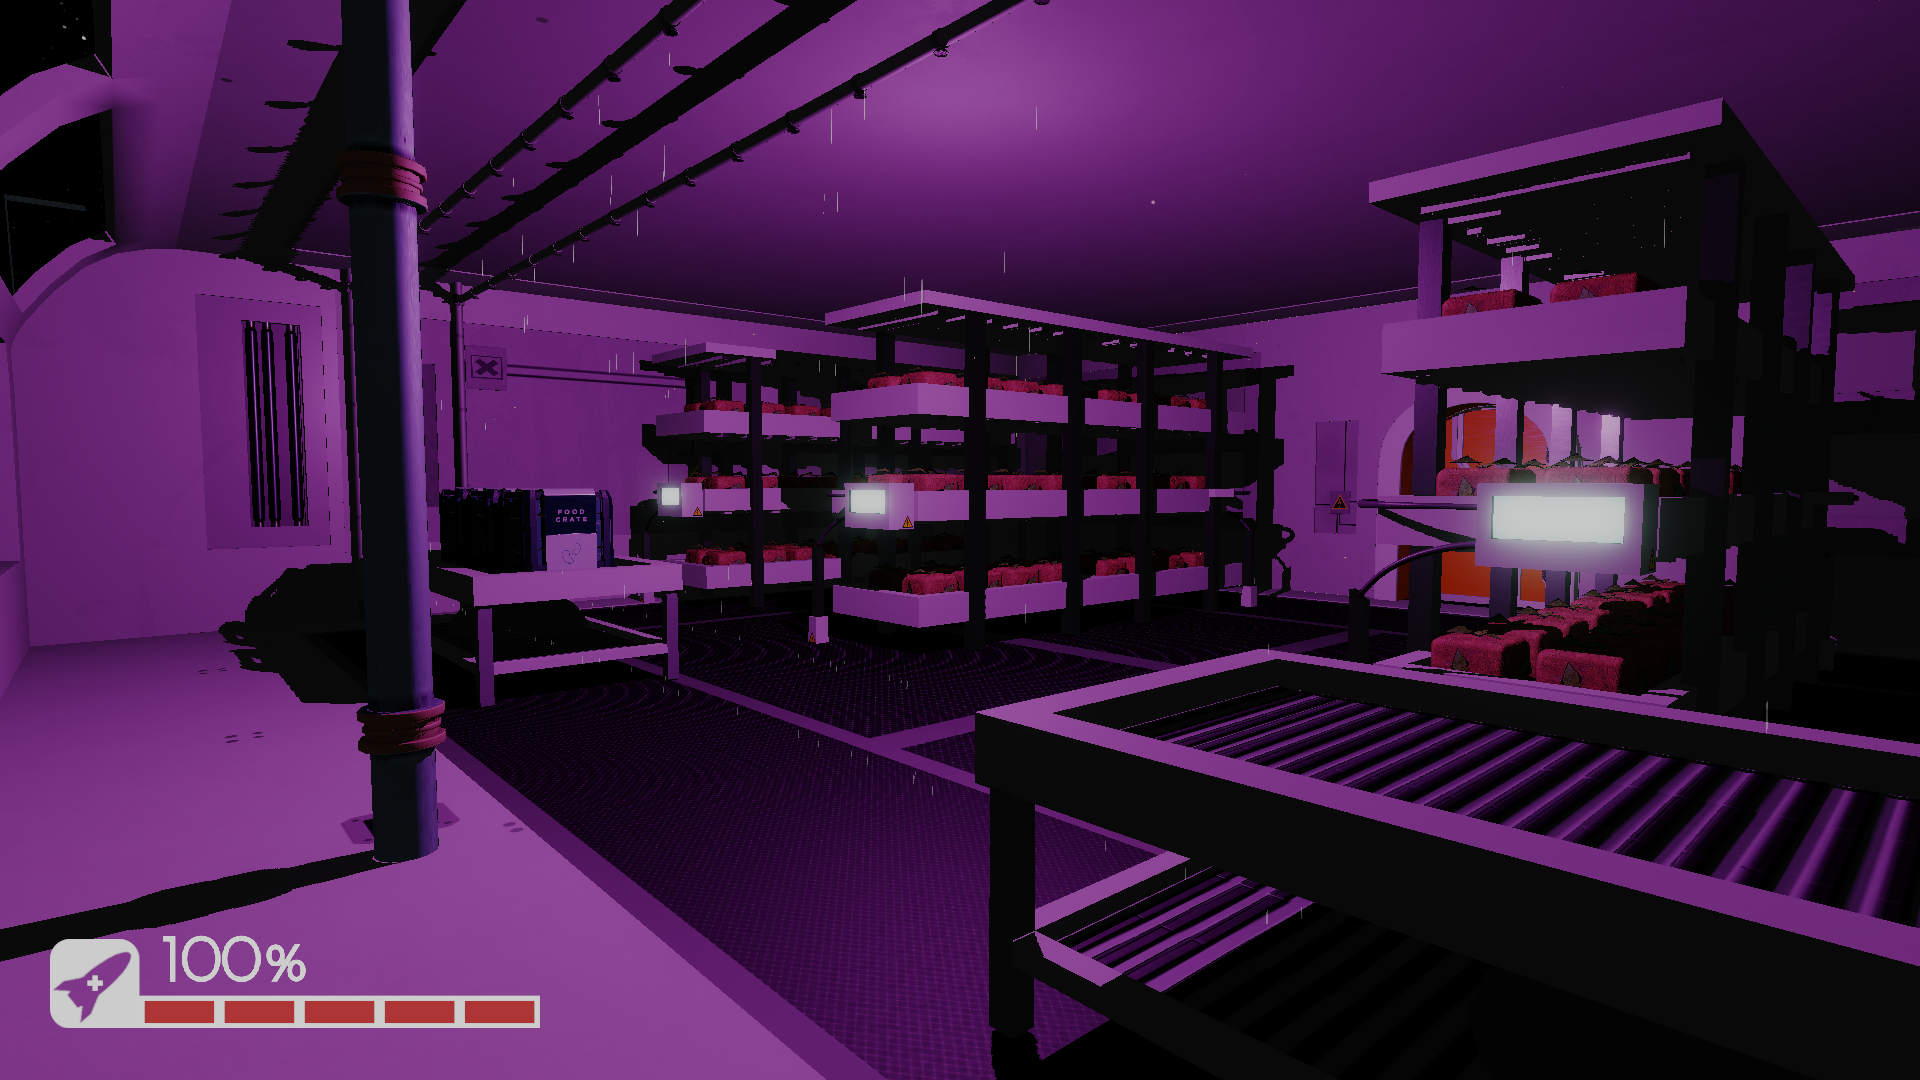 A farm, bathed in purple light, with shelves of plants growing and tables with water spraying from pipes above.